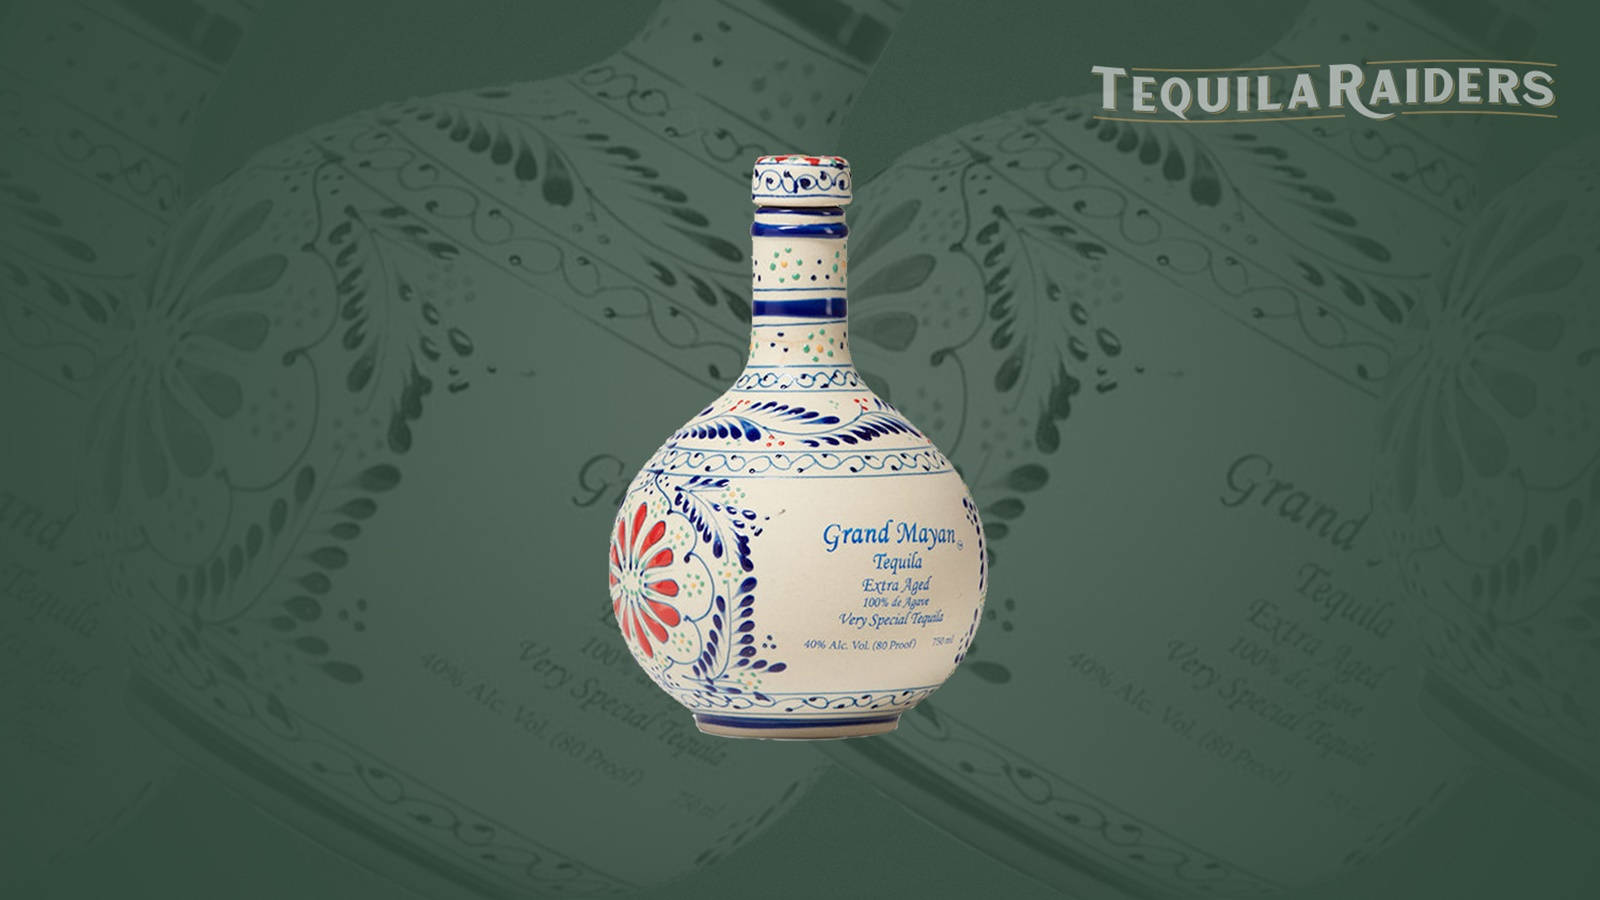 Grand Mayan Tequila Raiders Bottle Photography Picture